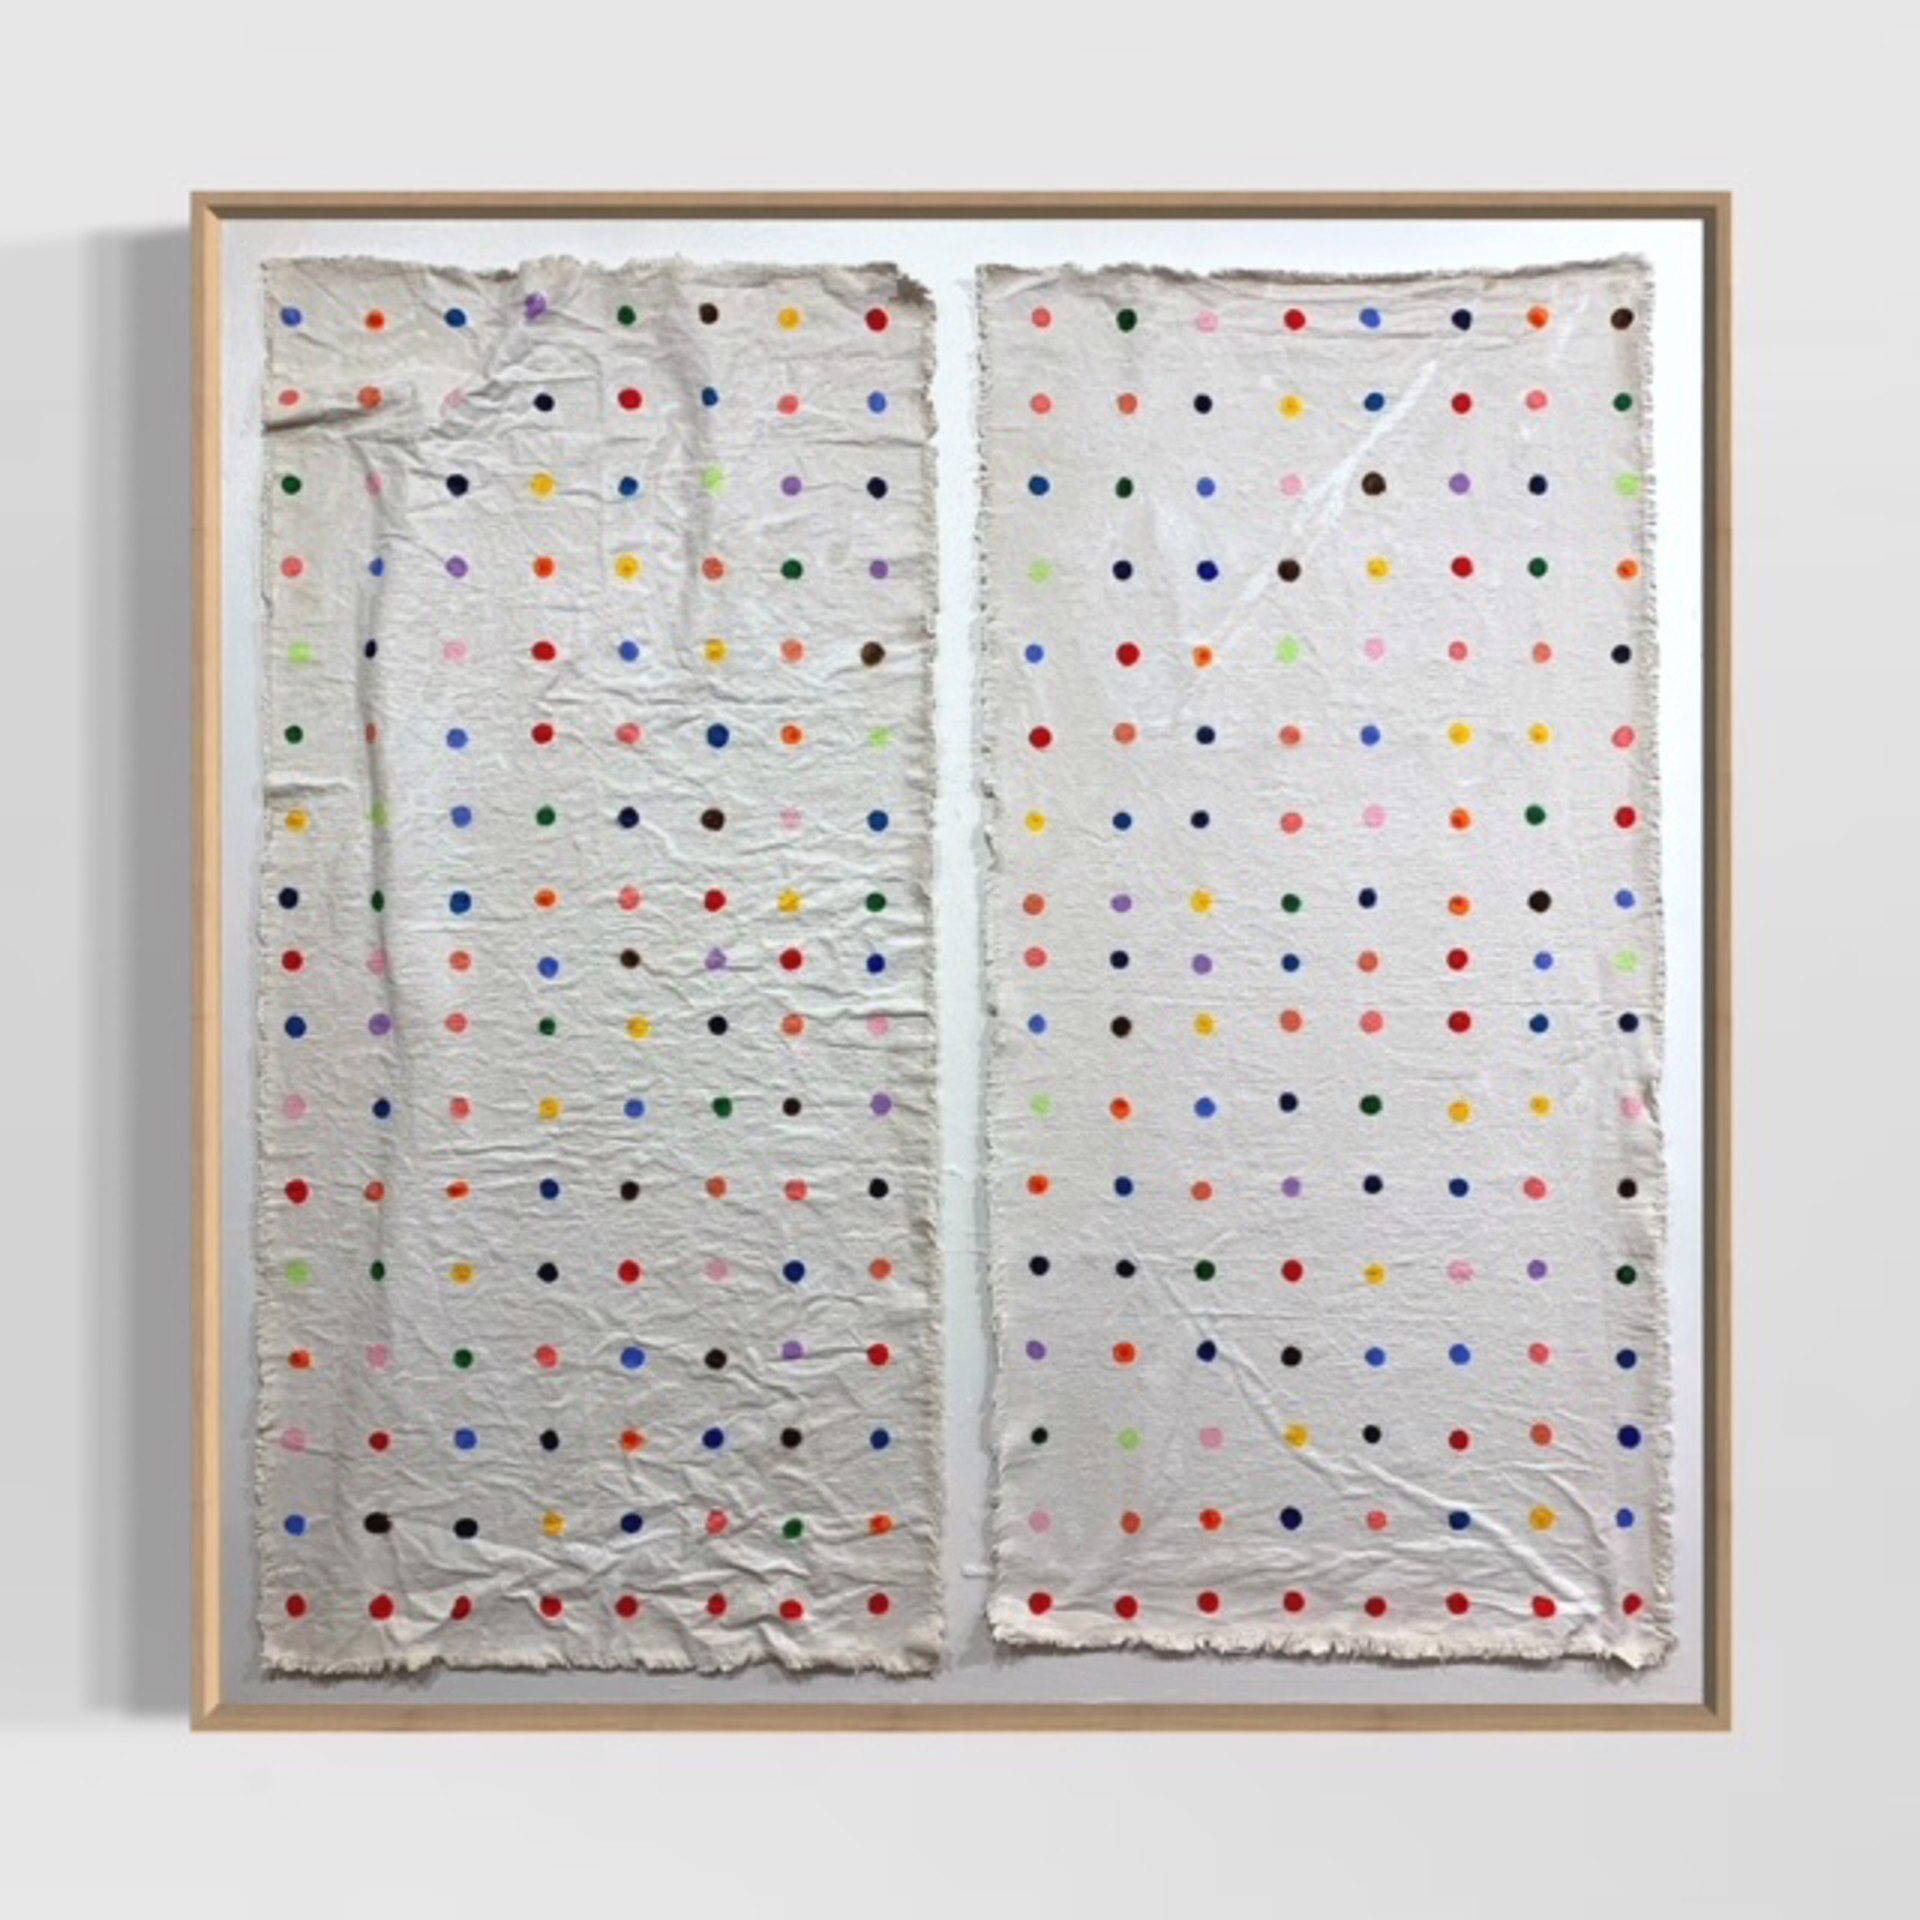 #243 Dots Enough/framed by Michael Denny